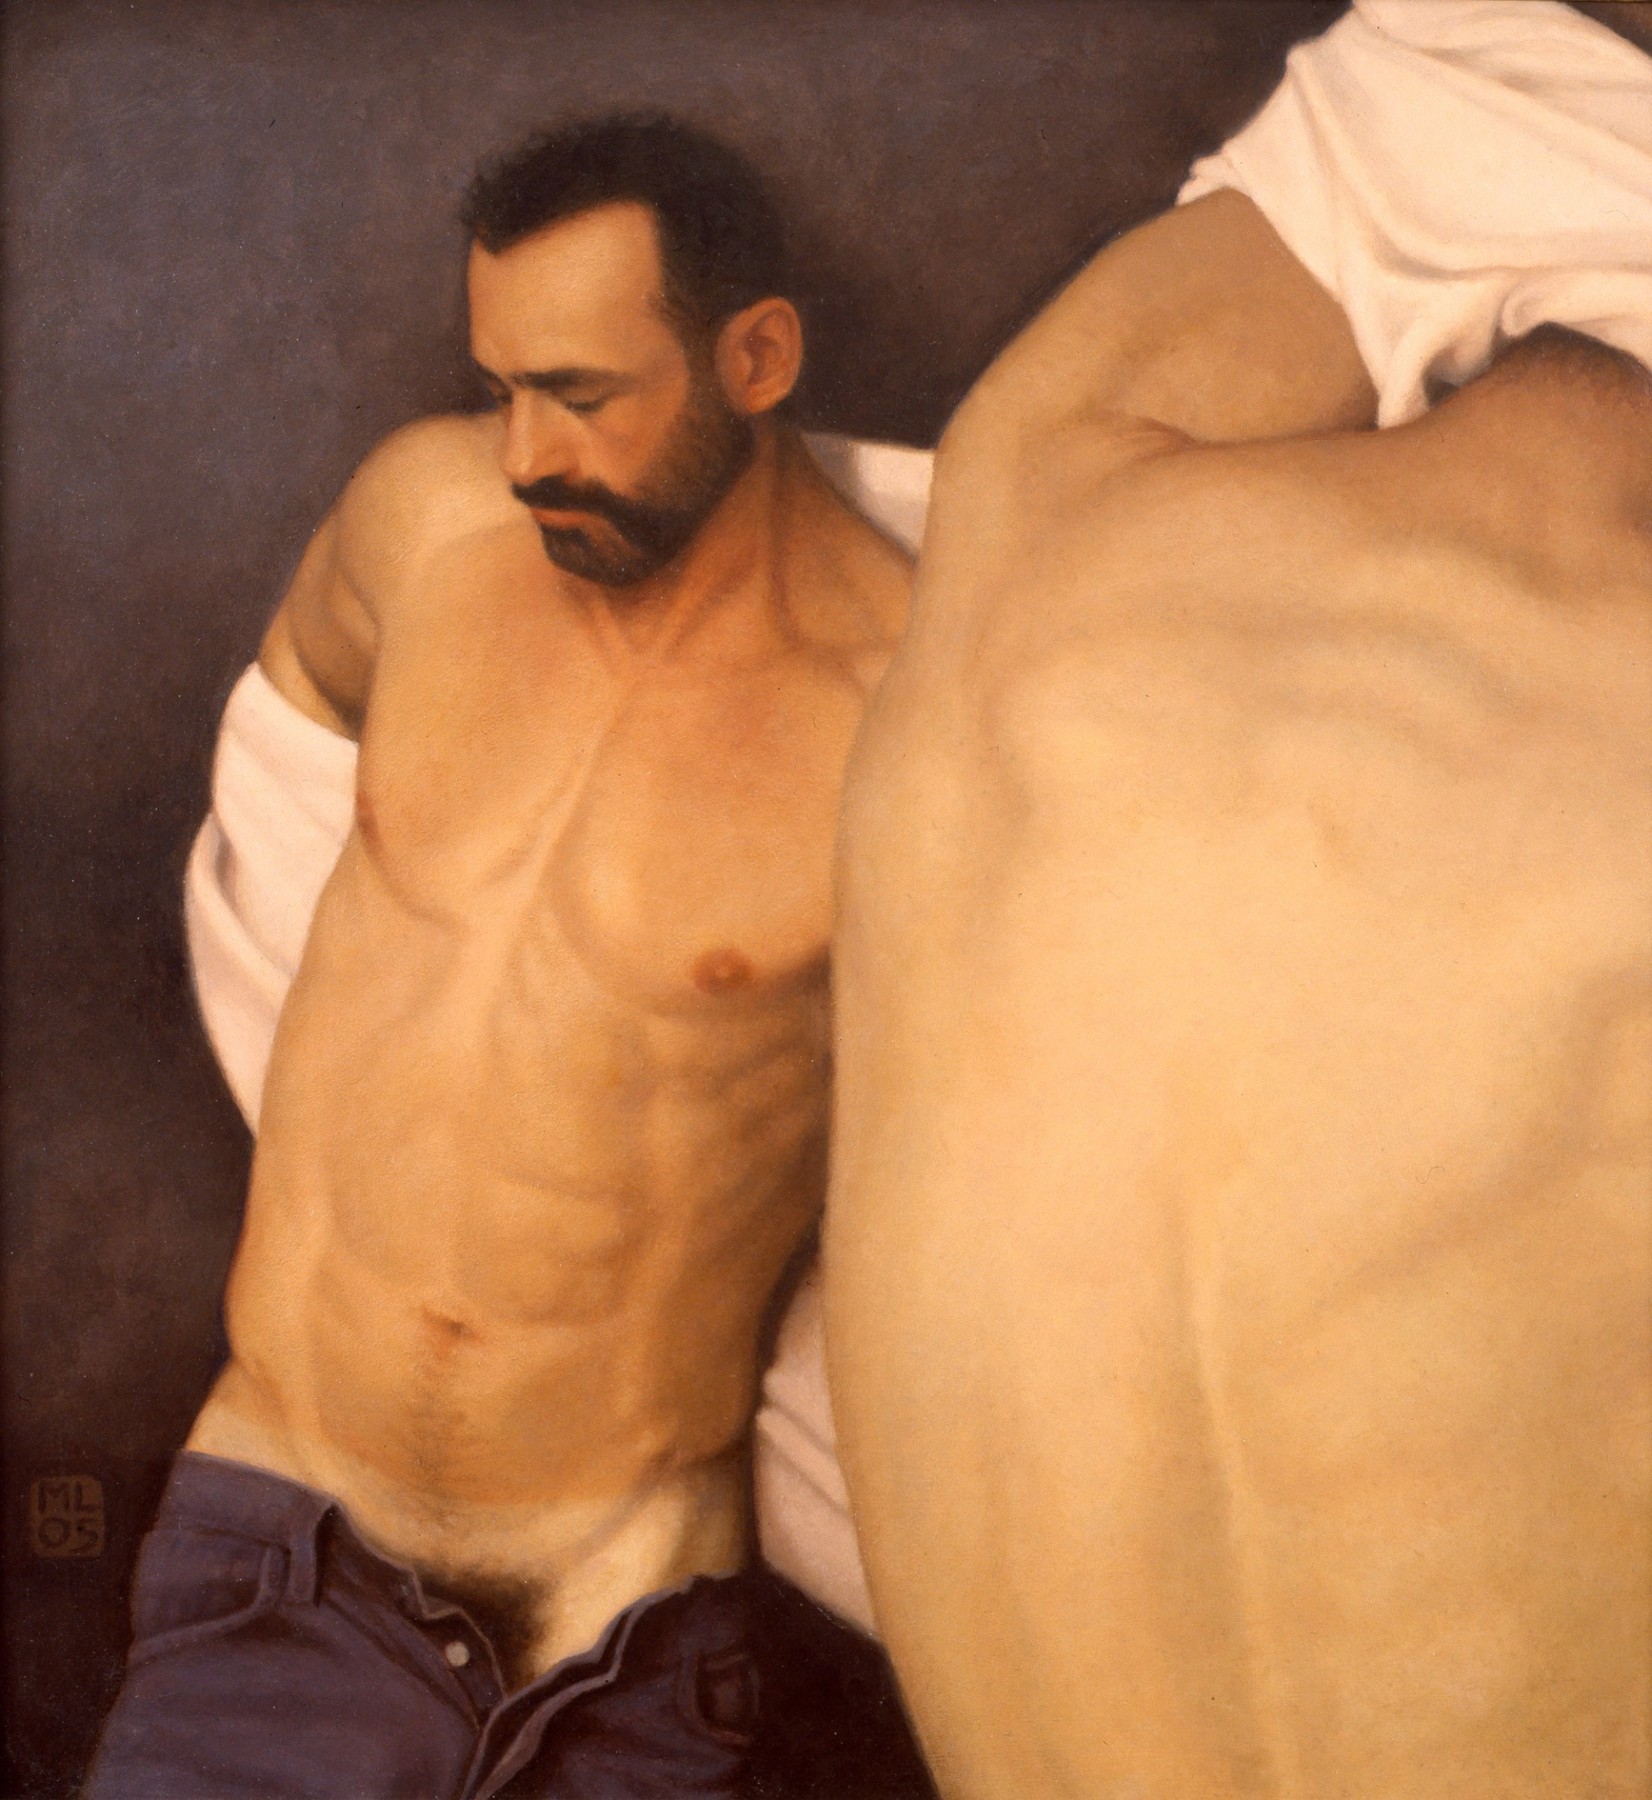 Michael Leonard, Changing Room (SOLD), 2005, alkyd-oil on masonite, 23 x 21 1/2 inches